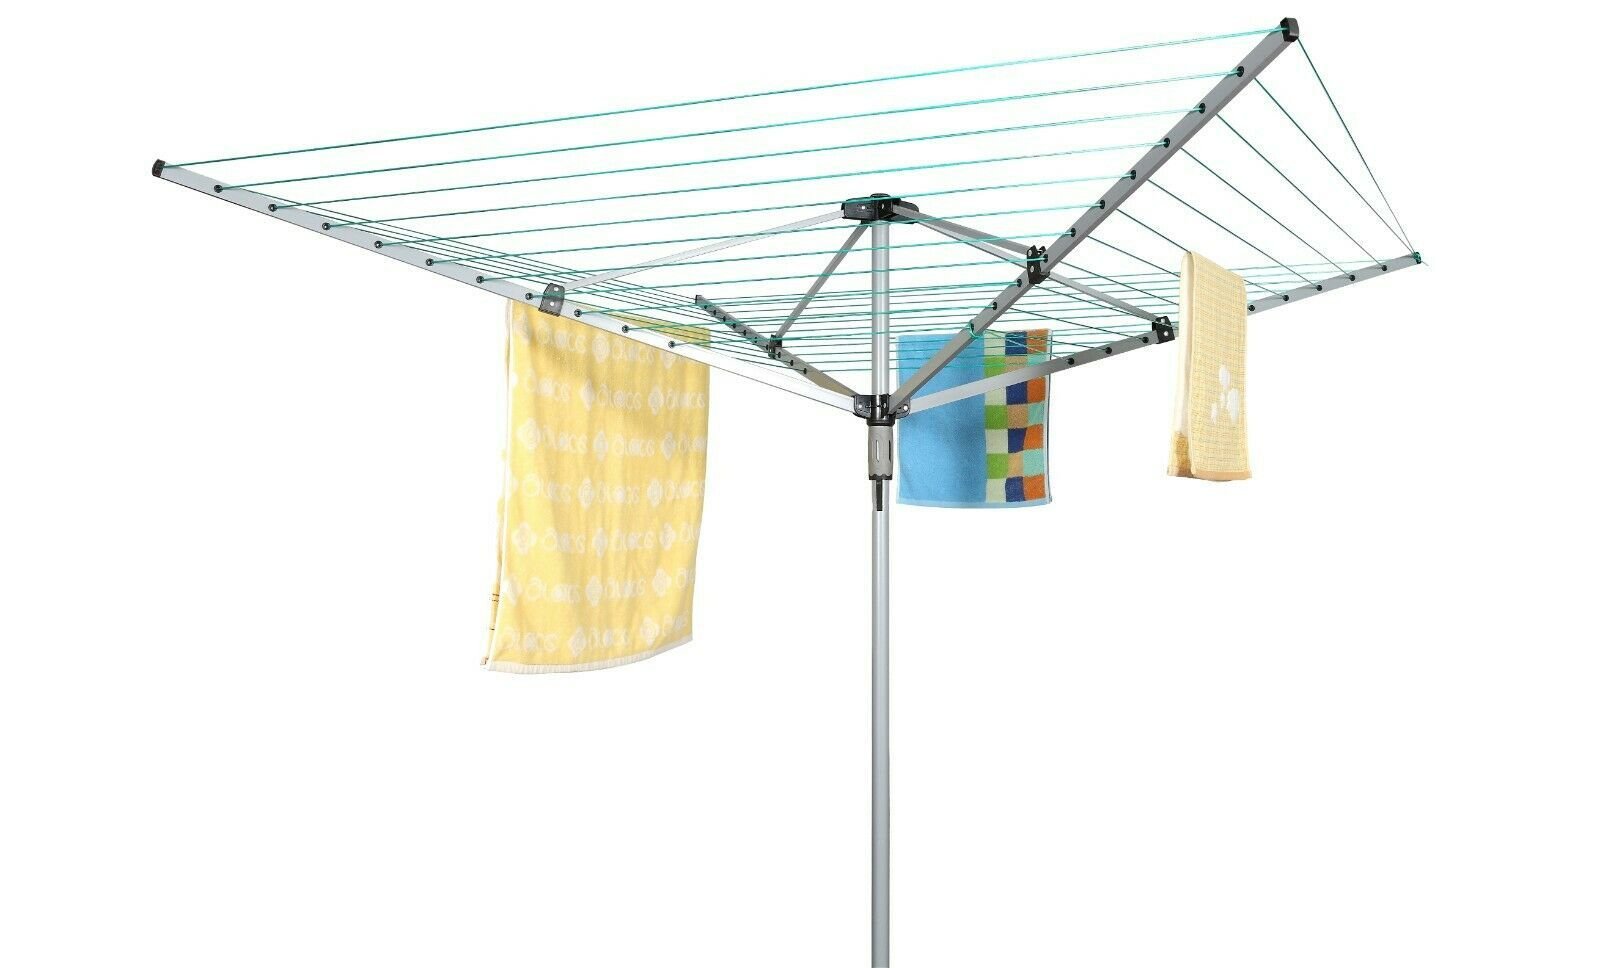 GARDEN 4 ARM ROTARY WASHING LINE CLOTHES AIRER DRYER 50M 